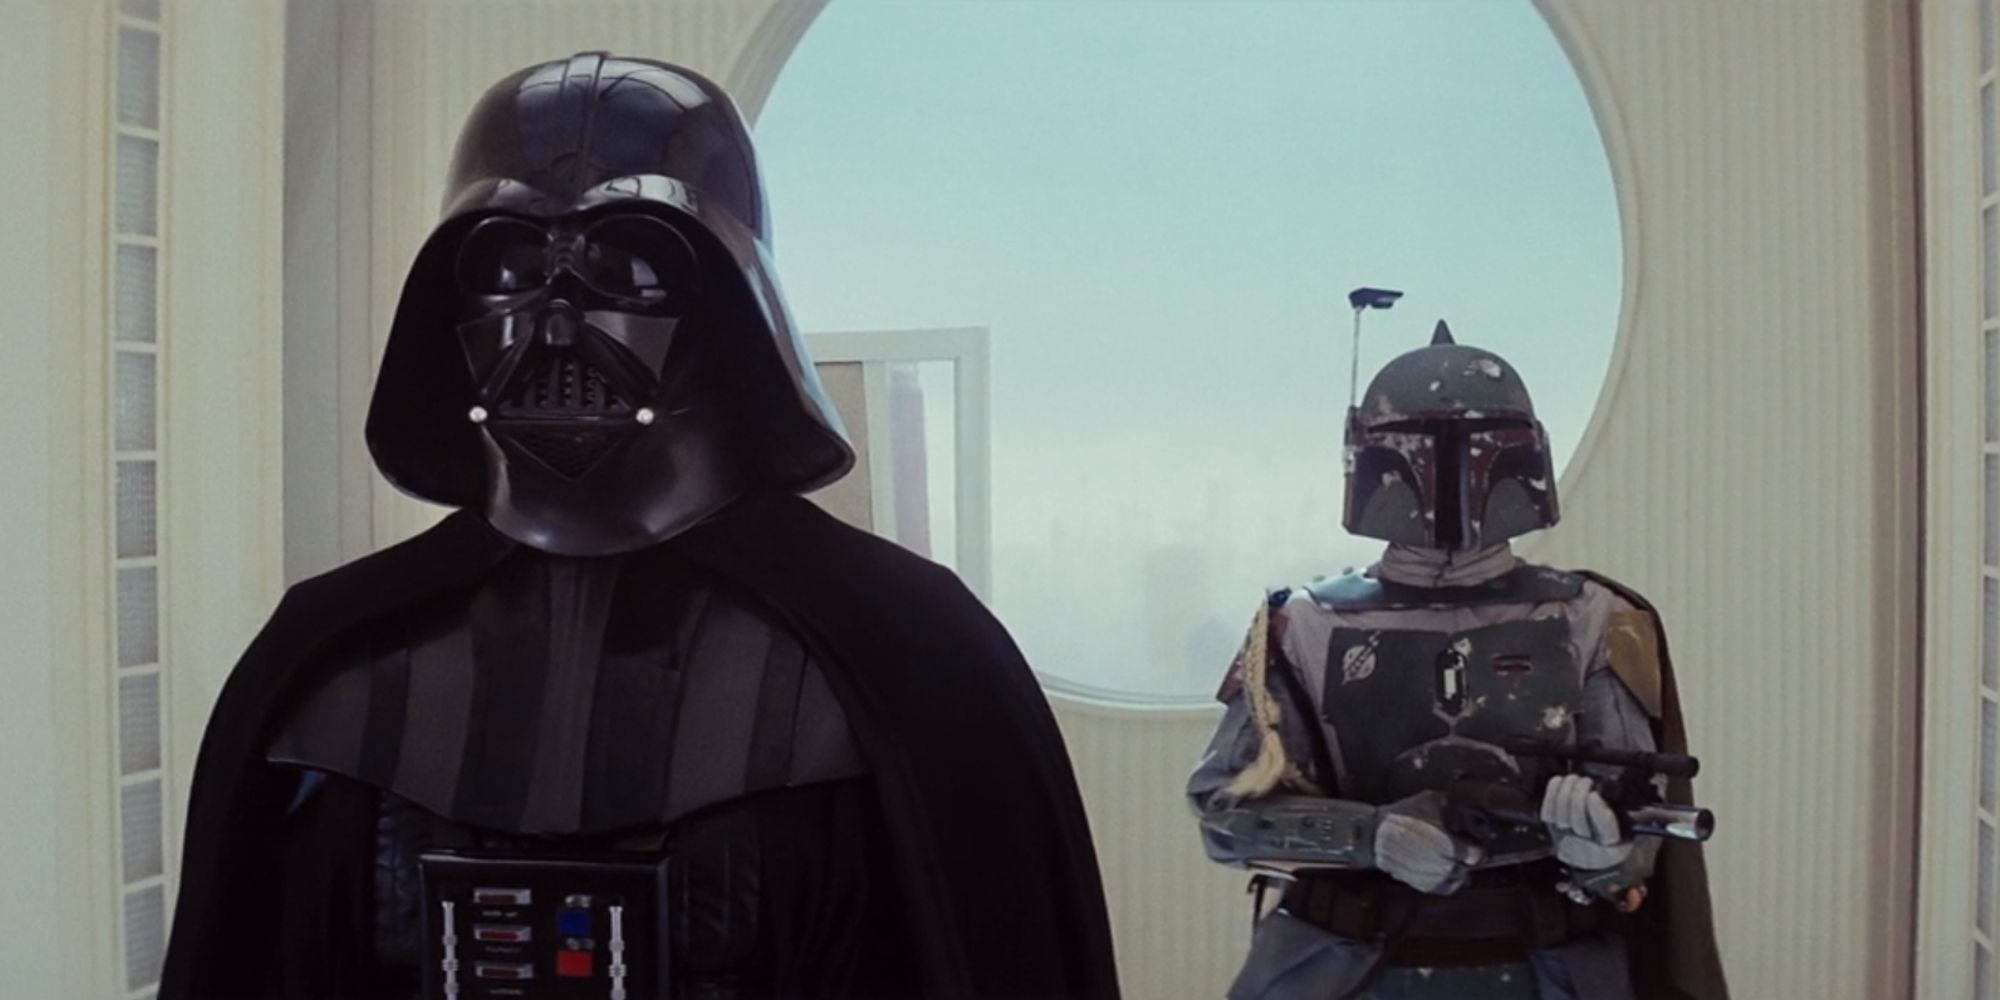 Darth Vader and Boba Fett in the Cloud City dining hall in The Empire Strikes Back